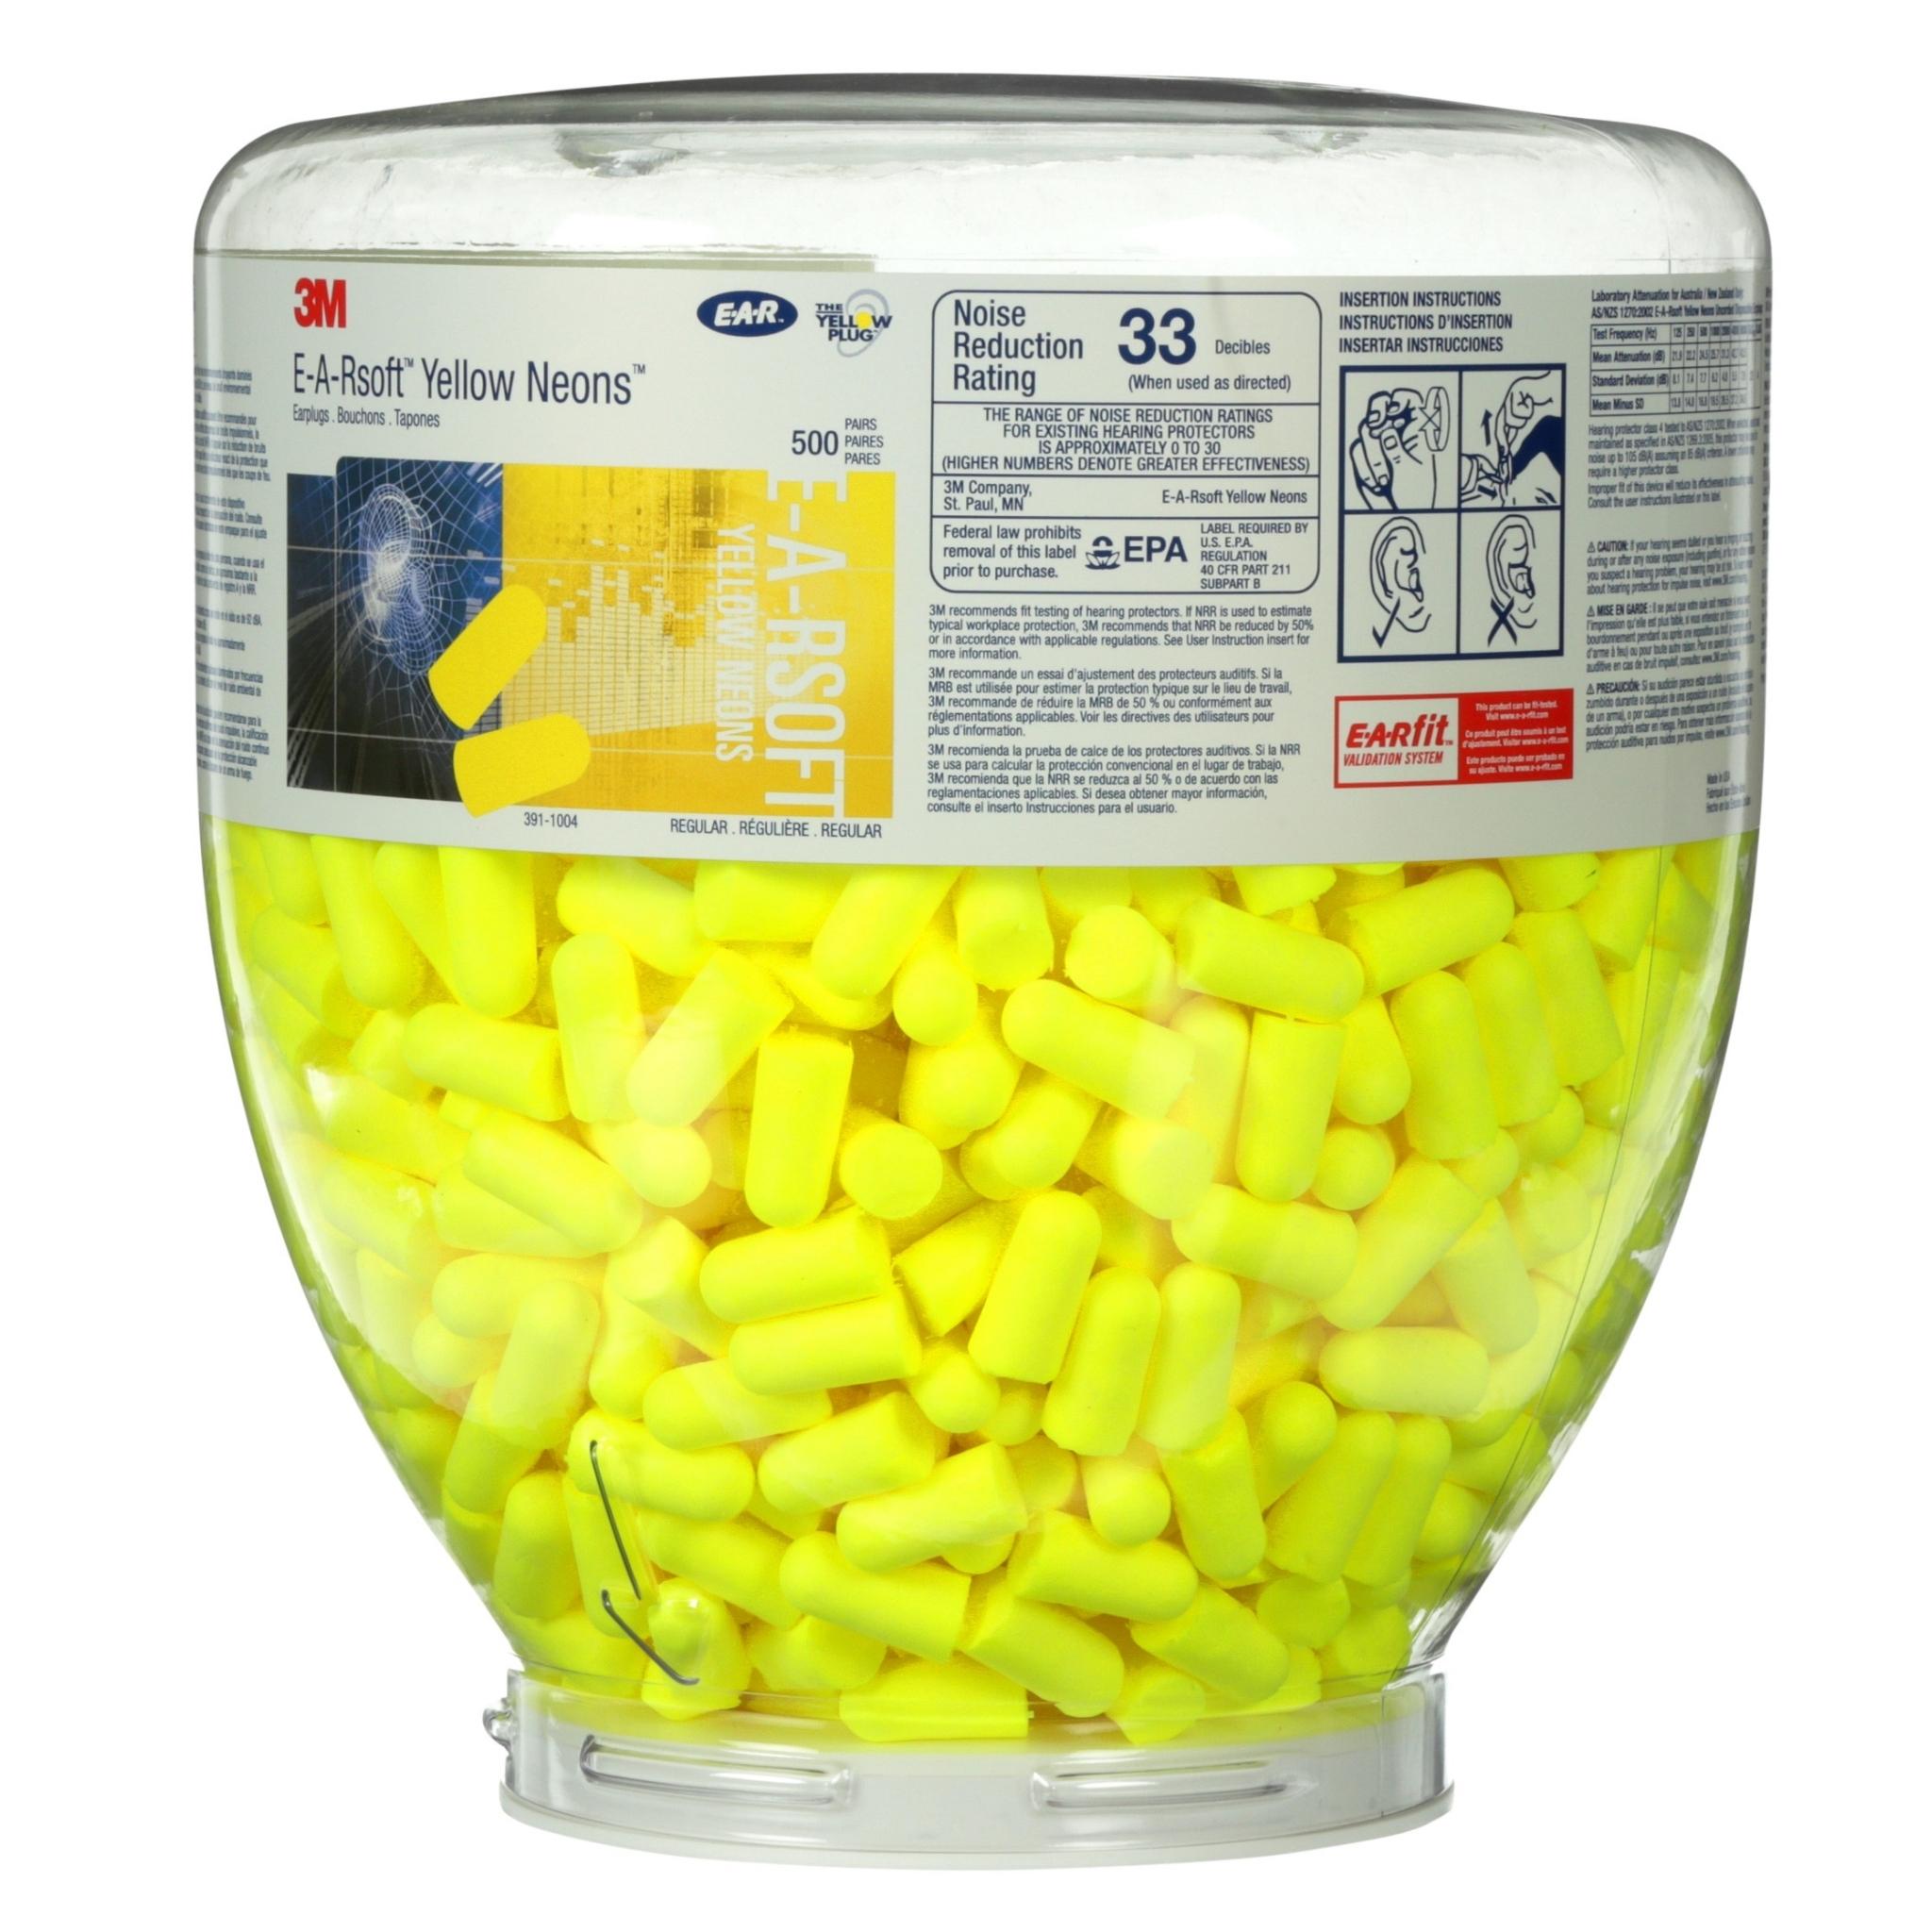 3M™ E-A-Rsoft™ Yellow Neons™ 500 Pair, One Touch™ Refill Earplugs 391-1004, Uncorded, Regular Size